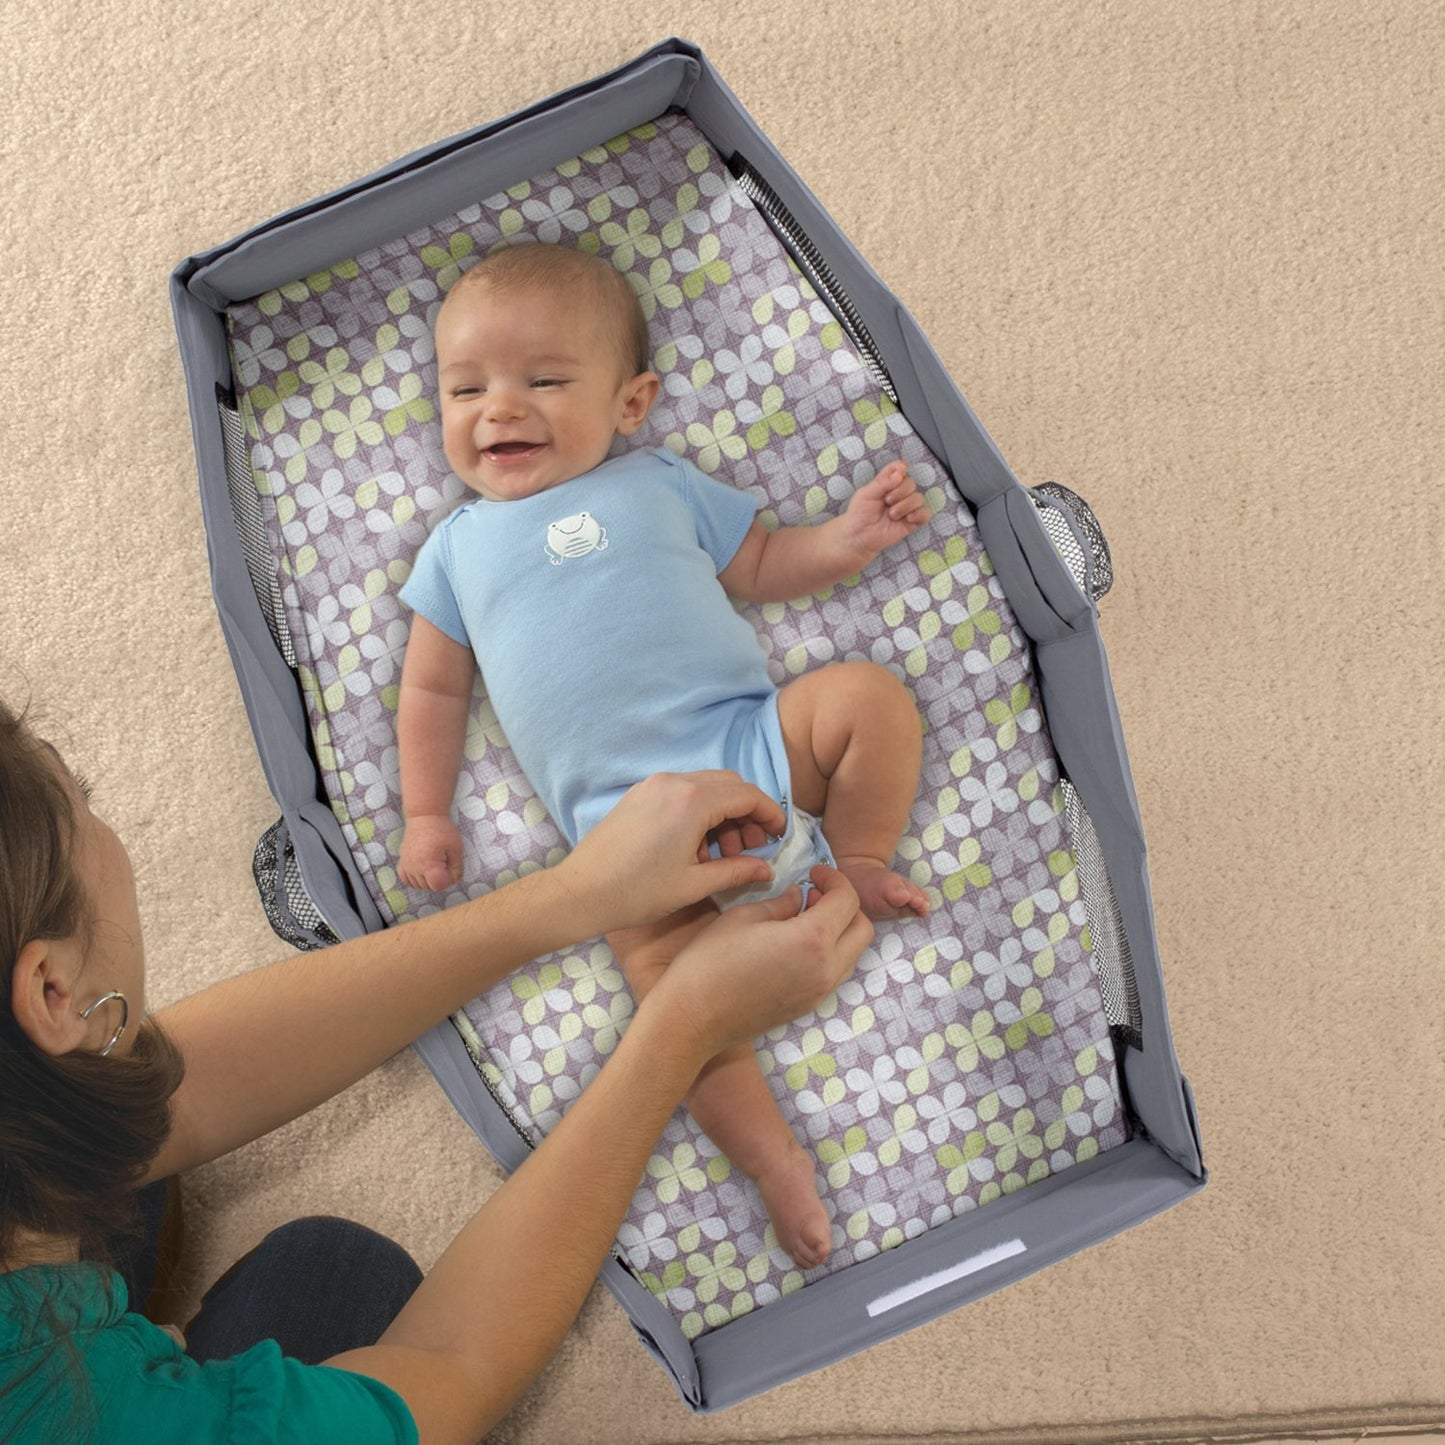 Baby Safety Isolation Bed